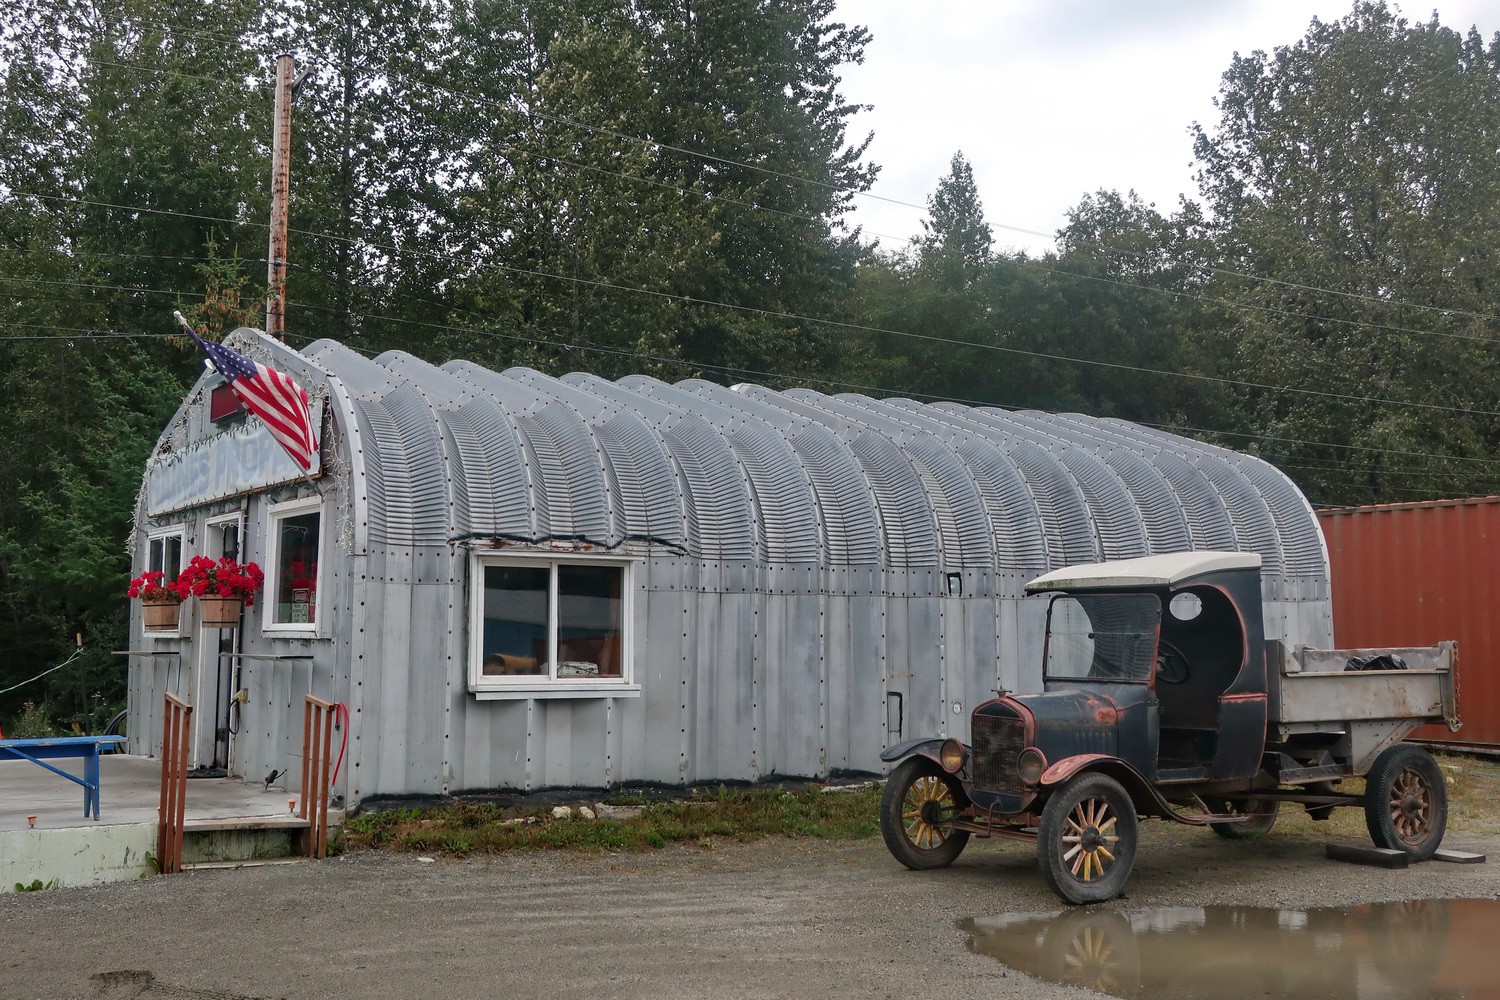 Ancient car in Haines